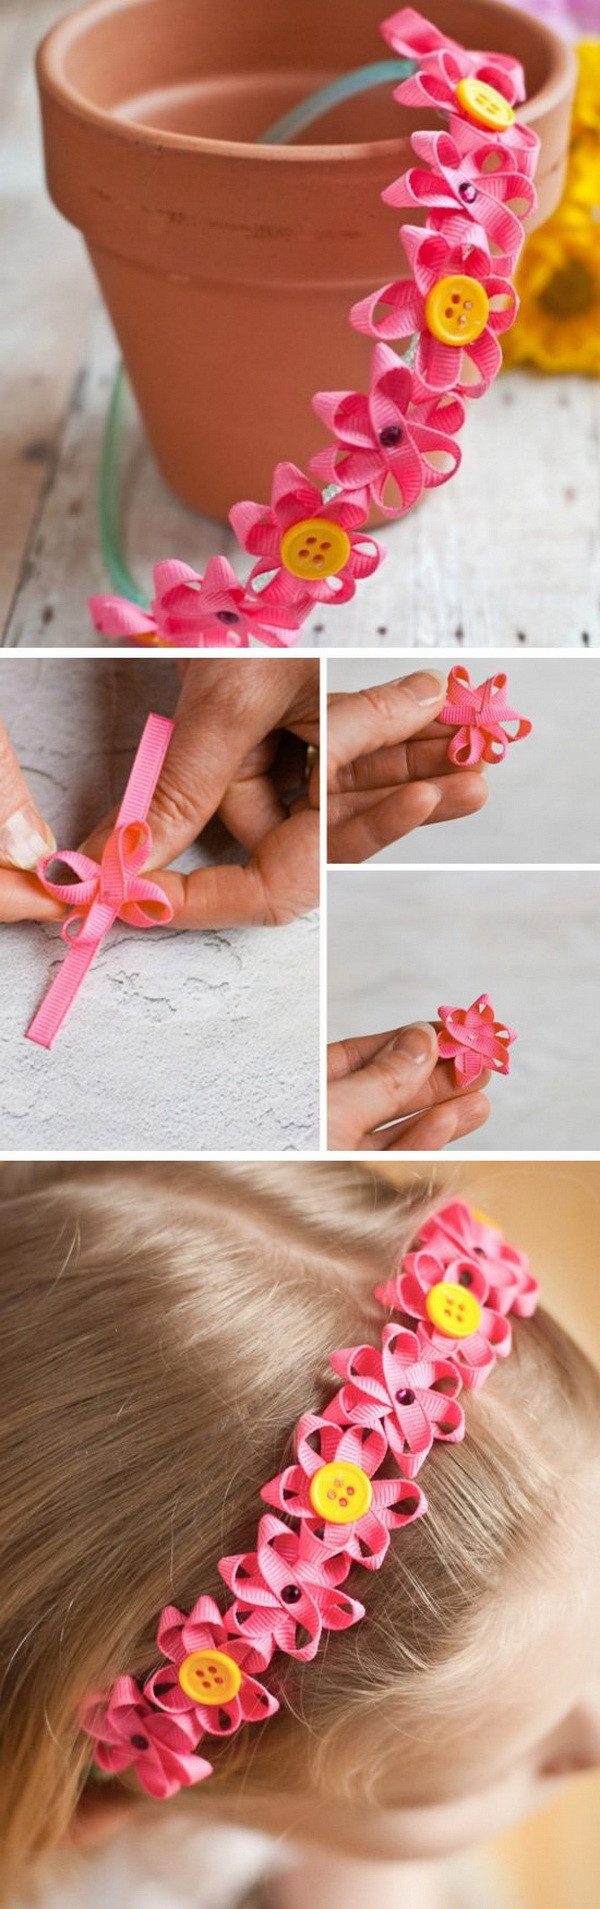 Easy Craft Gifts
 Easy Craft Ideas to Have Fun with Your Kids Listing More